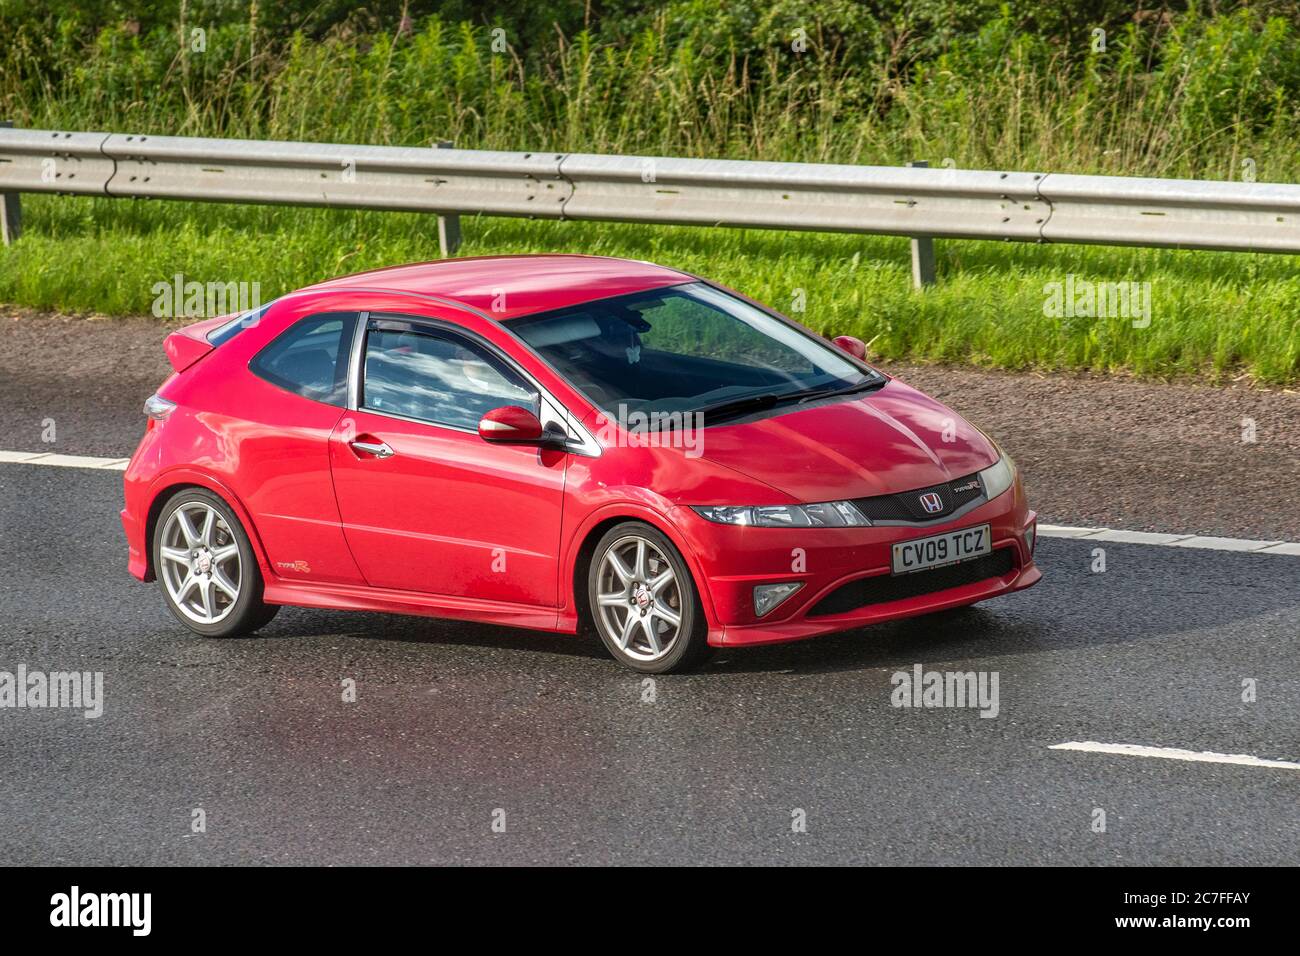 Honda Cars England High Resolution Stock Photography and Images - Alamy